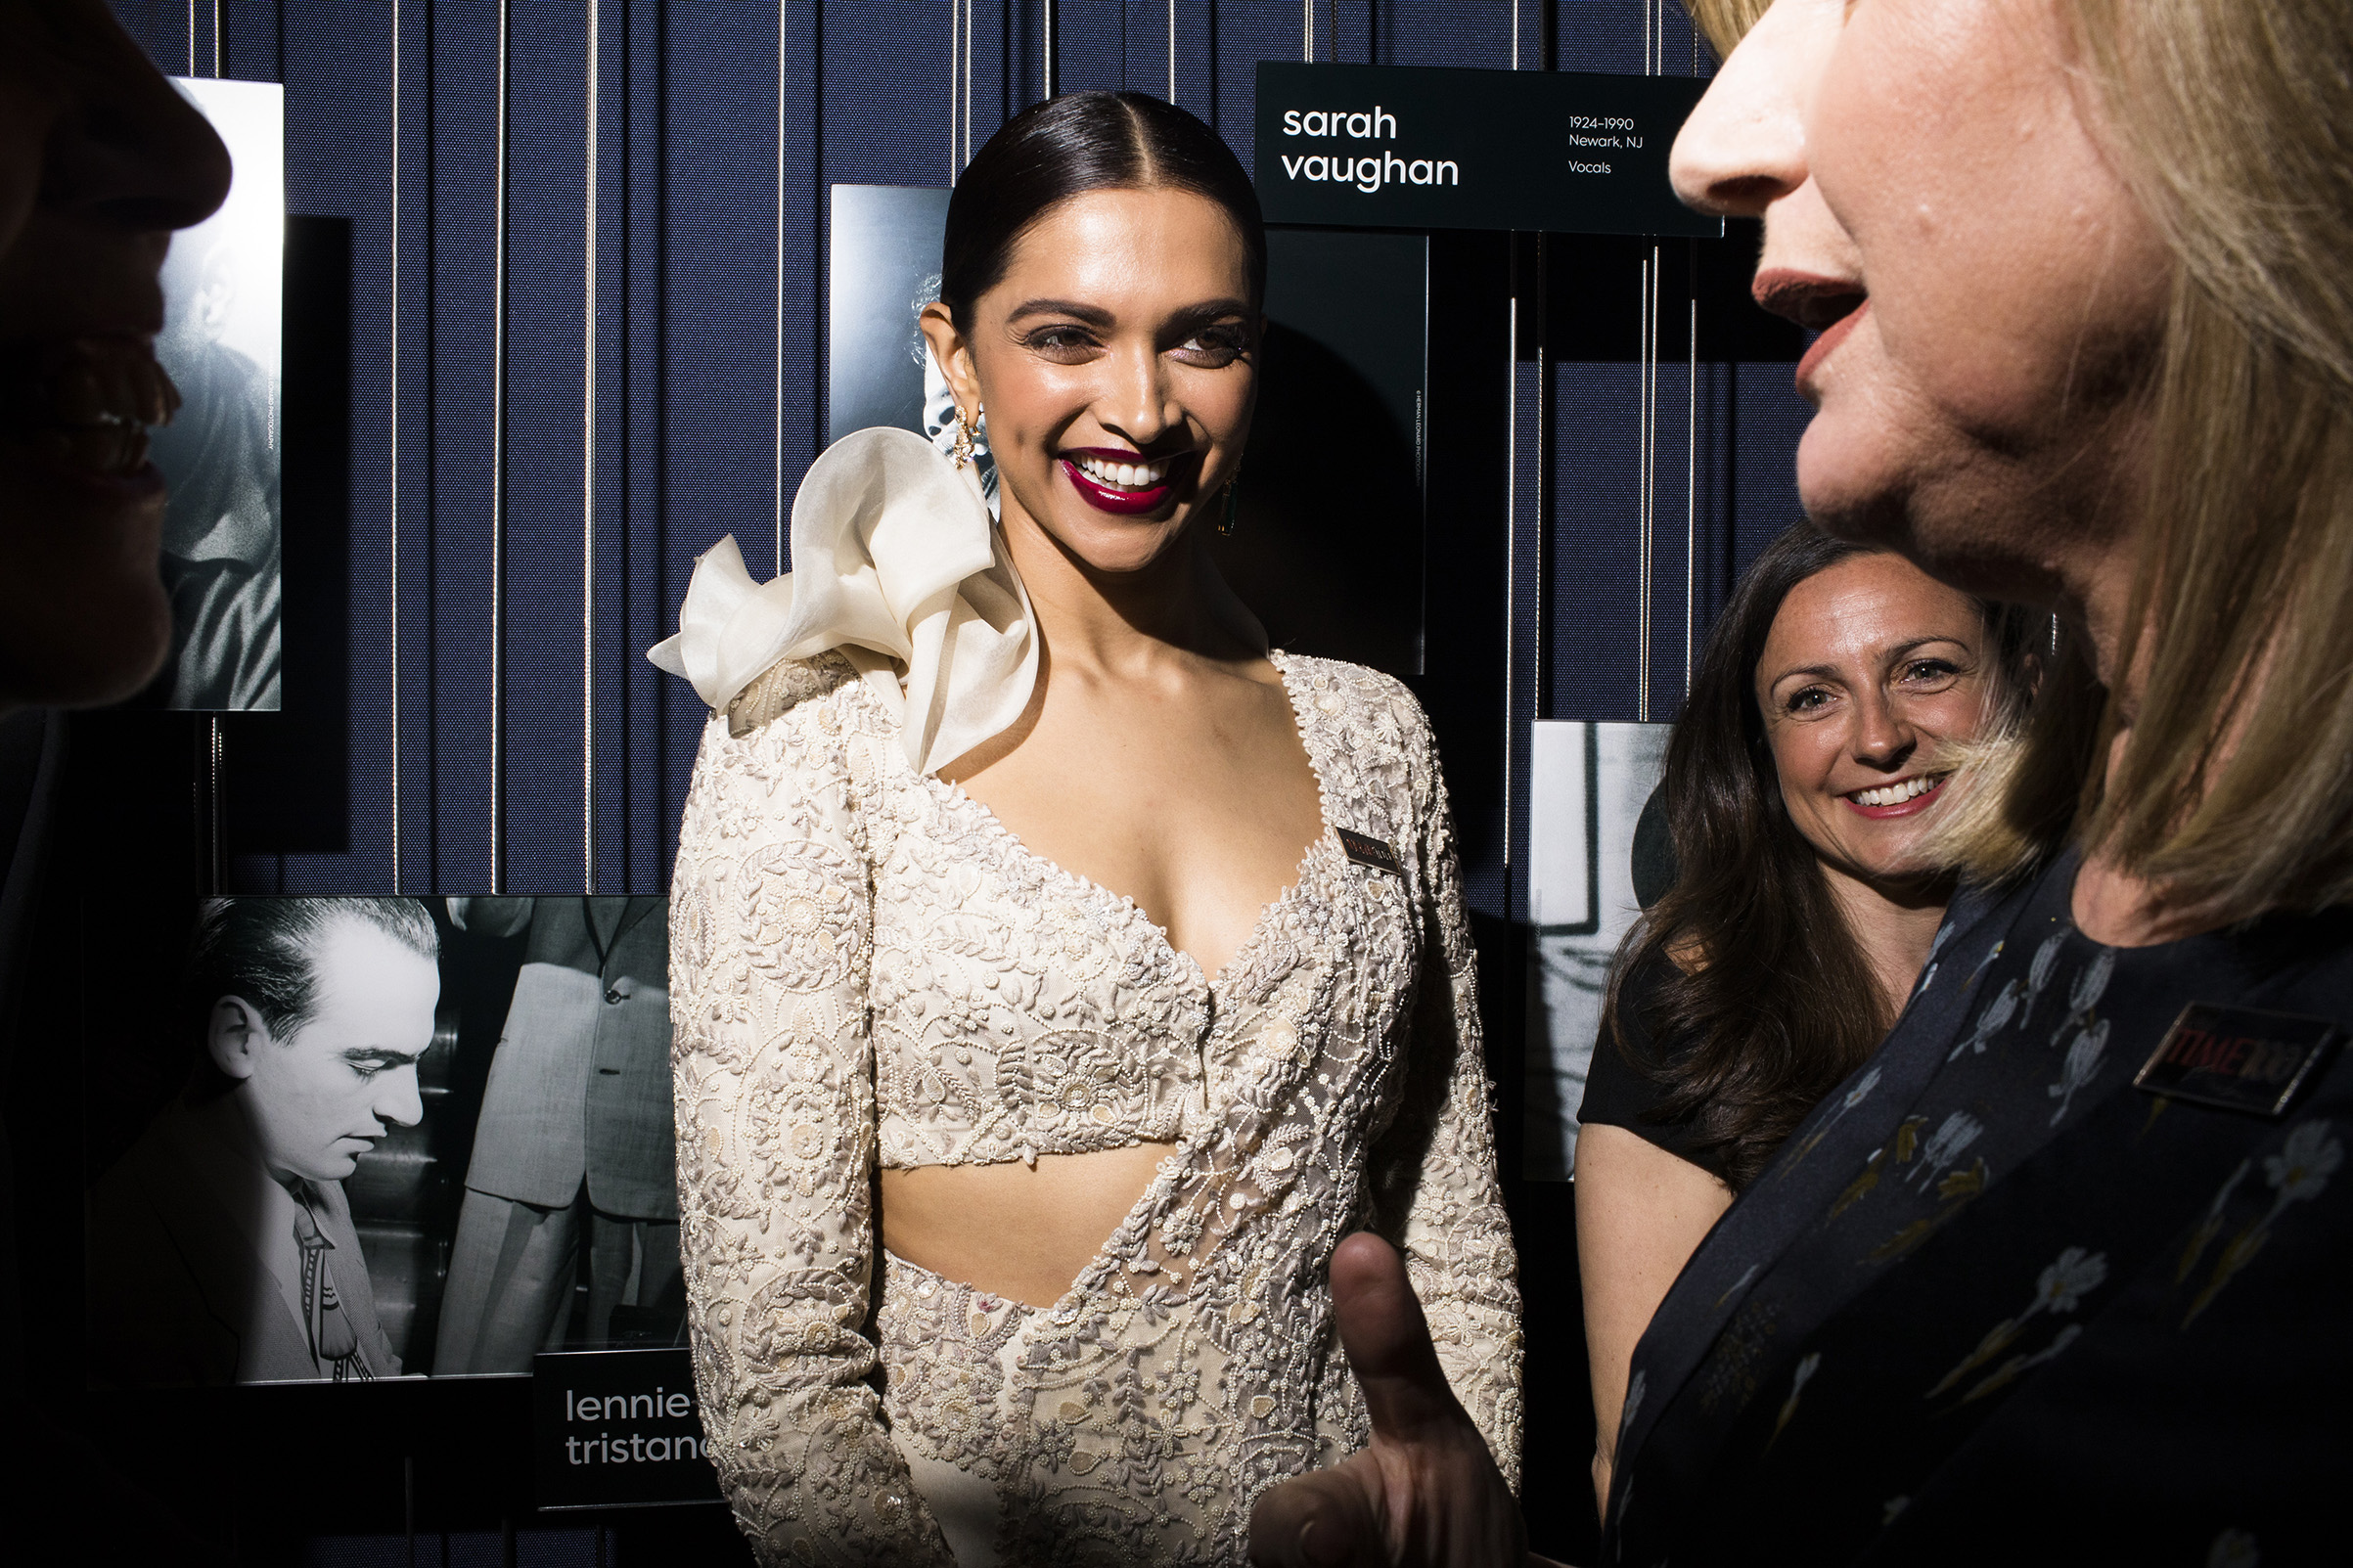 Deepika Padukone at the Time 100 Gala at Jazz at Lincoln Center on April 24, 2018 in New York City. (Landon Nordeman for TIME)